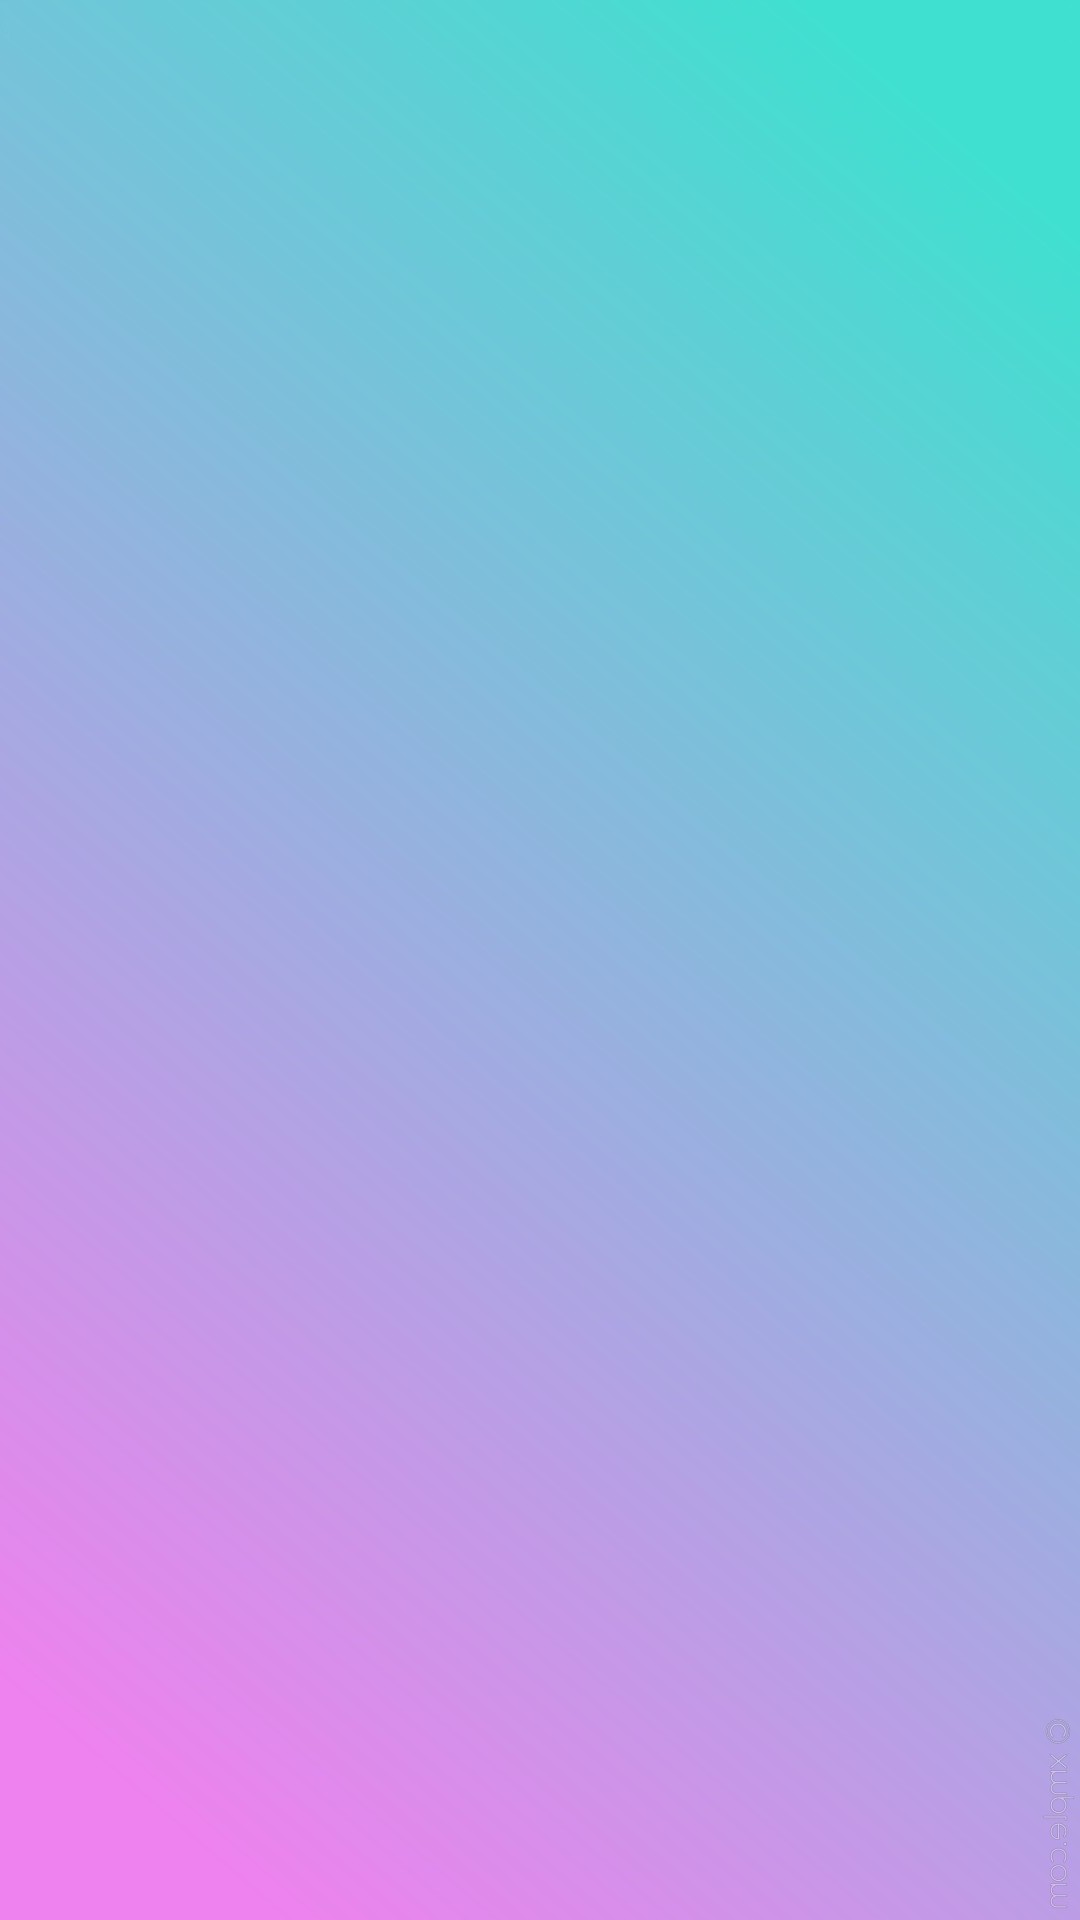 Wallpaper Gradient Desktop with high-resolution 1080x1920 pixel. You can use this wallpaper for your Windows and Mac OS computers as well as your Android and iPhone smartphones